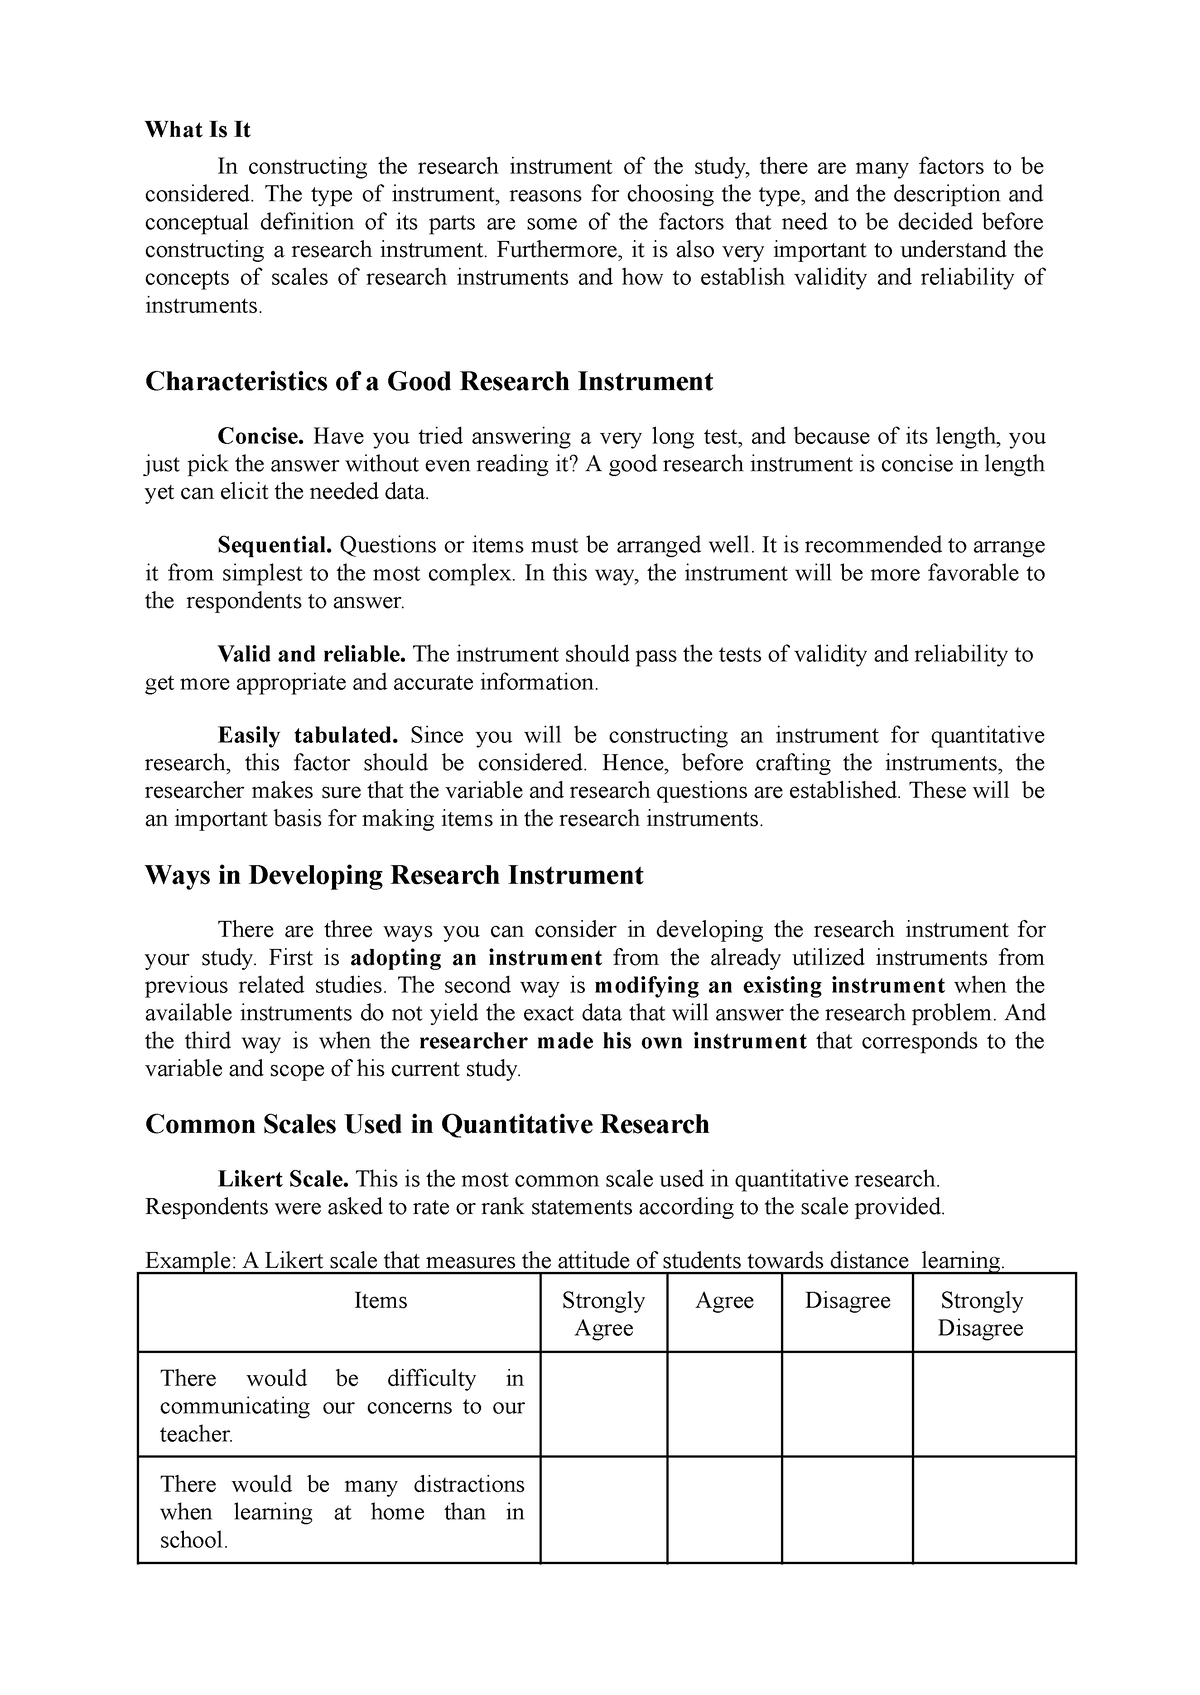 unethical implementation of a research instrument essay